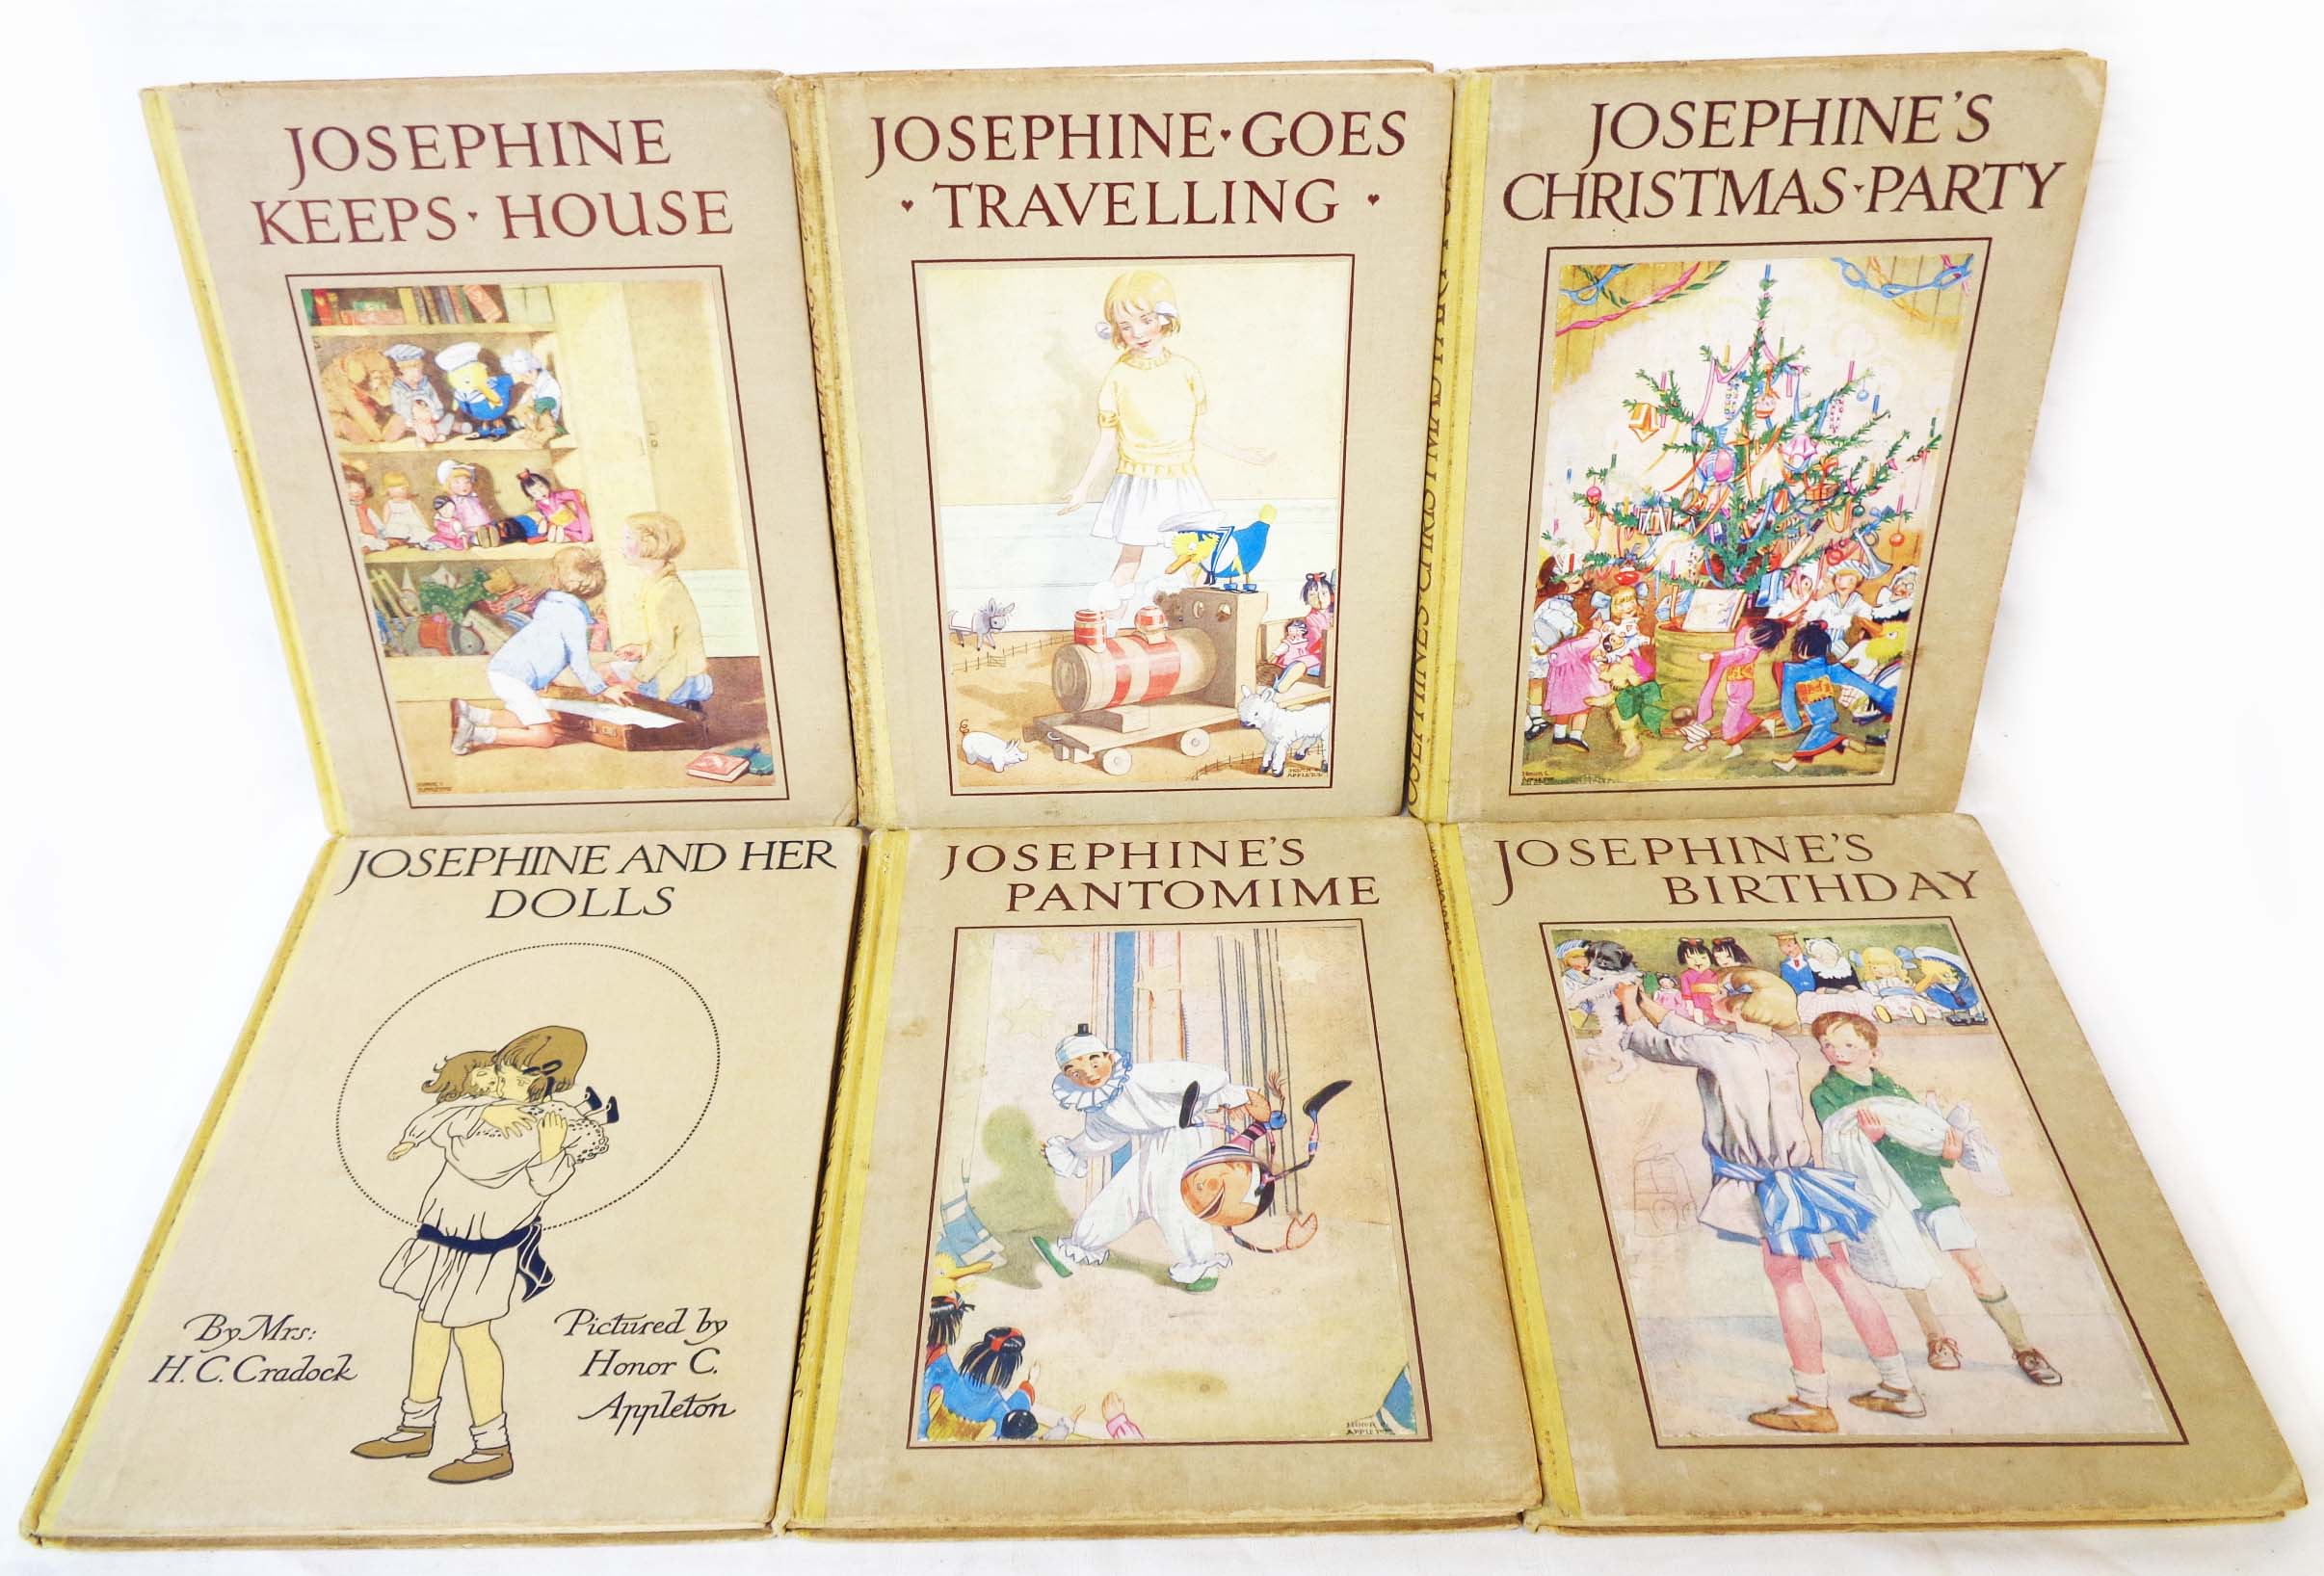 A set of six vintage Josephine books by Mrs. H.C. Cradock, with illustrations by Honor C.